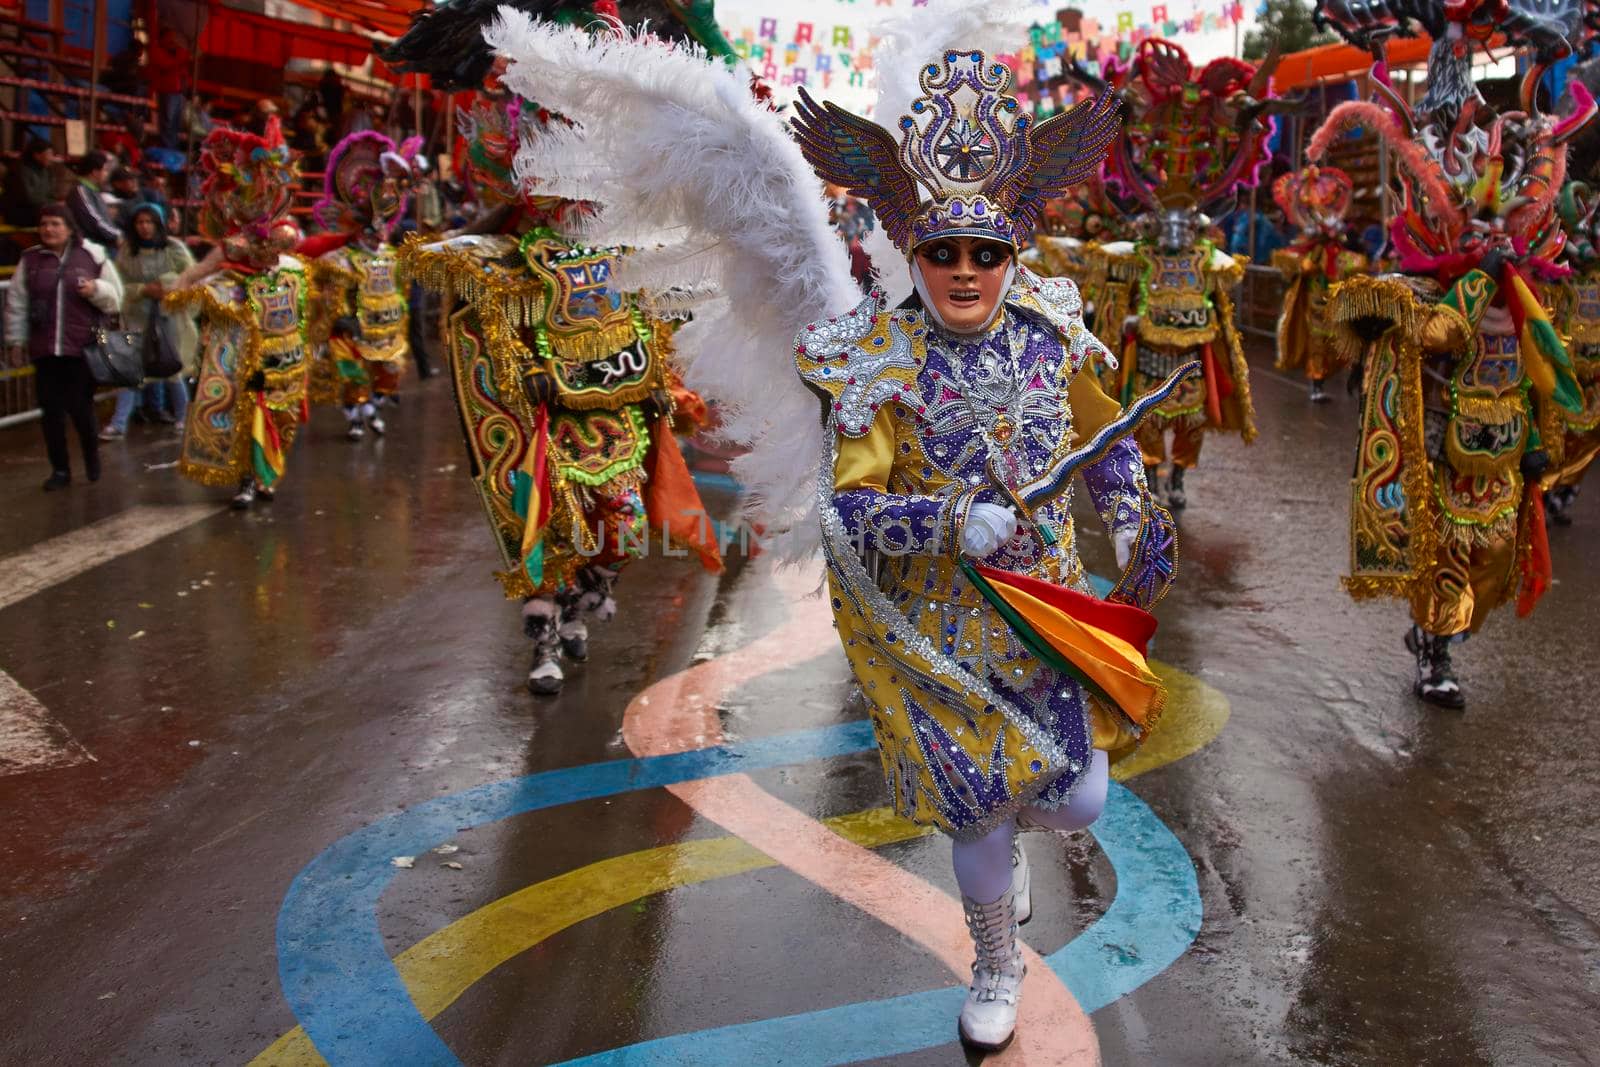 ORURO, BOLIVIA - FEBRUARY 25, 2017: Diablada dancers in ornate costumes parade through the mining city of Oruro on the Altiplano of Bolivia during the annual carnival.